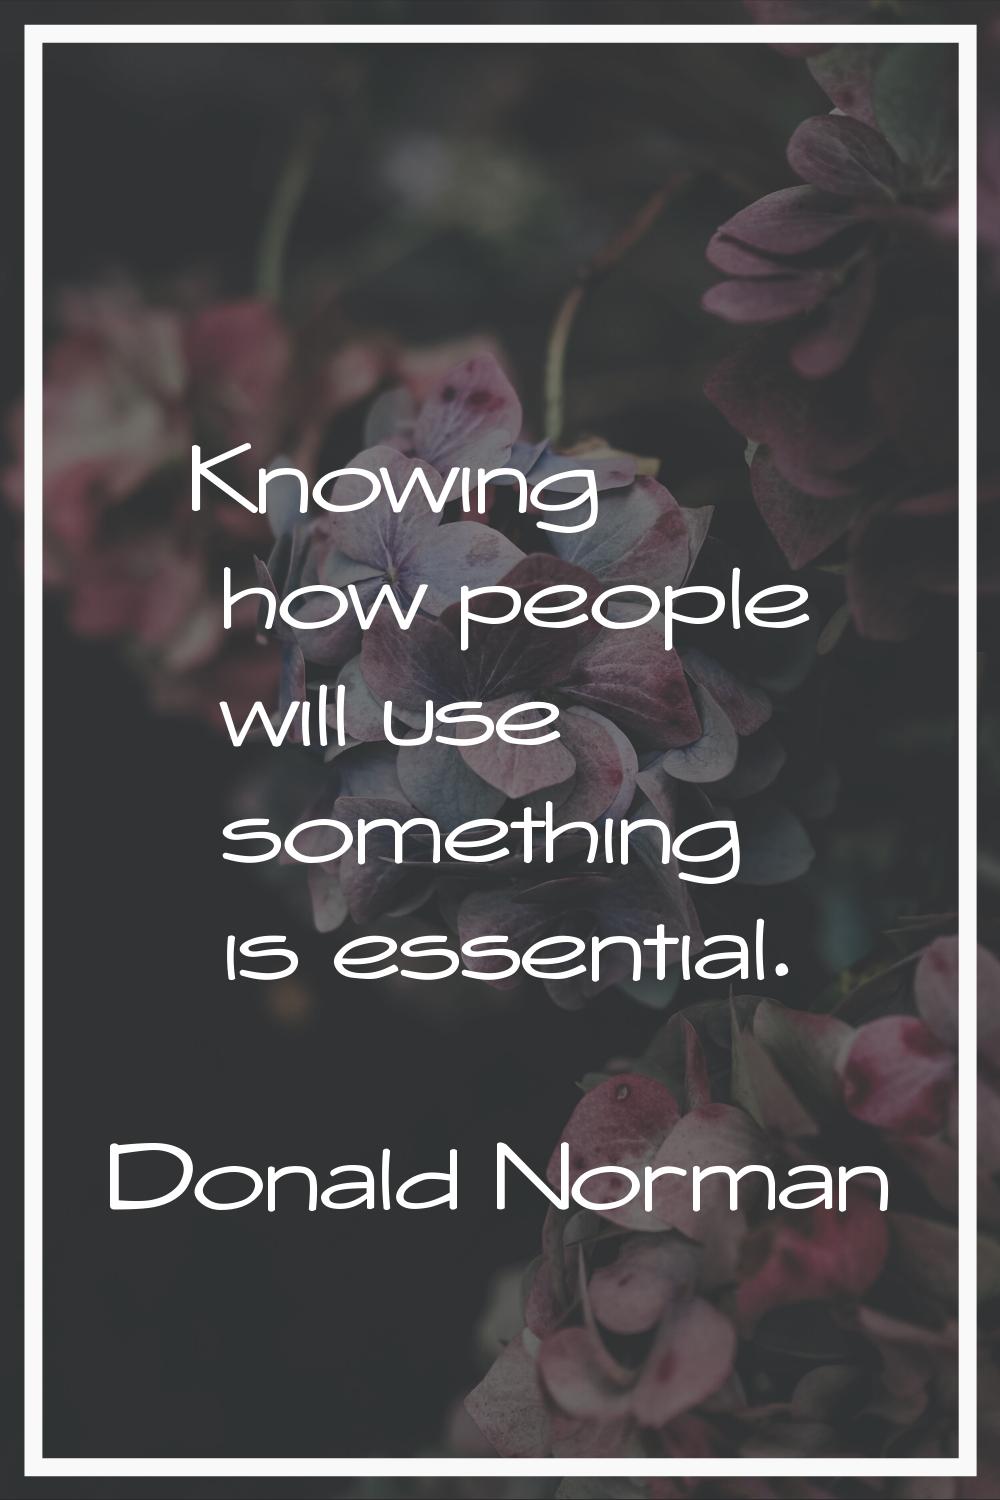 Knowing how people will use something is essential.